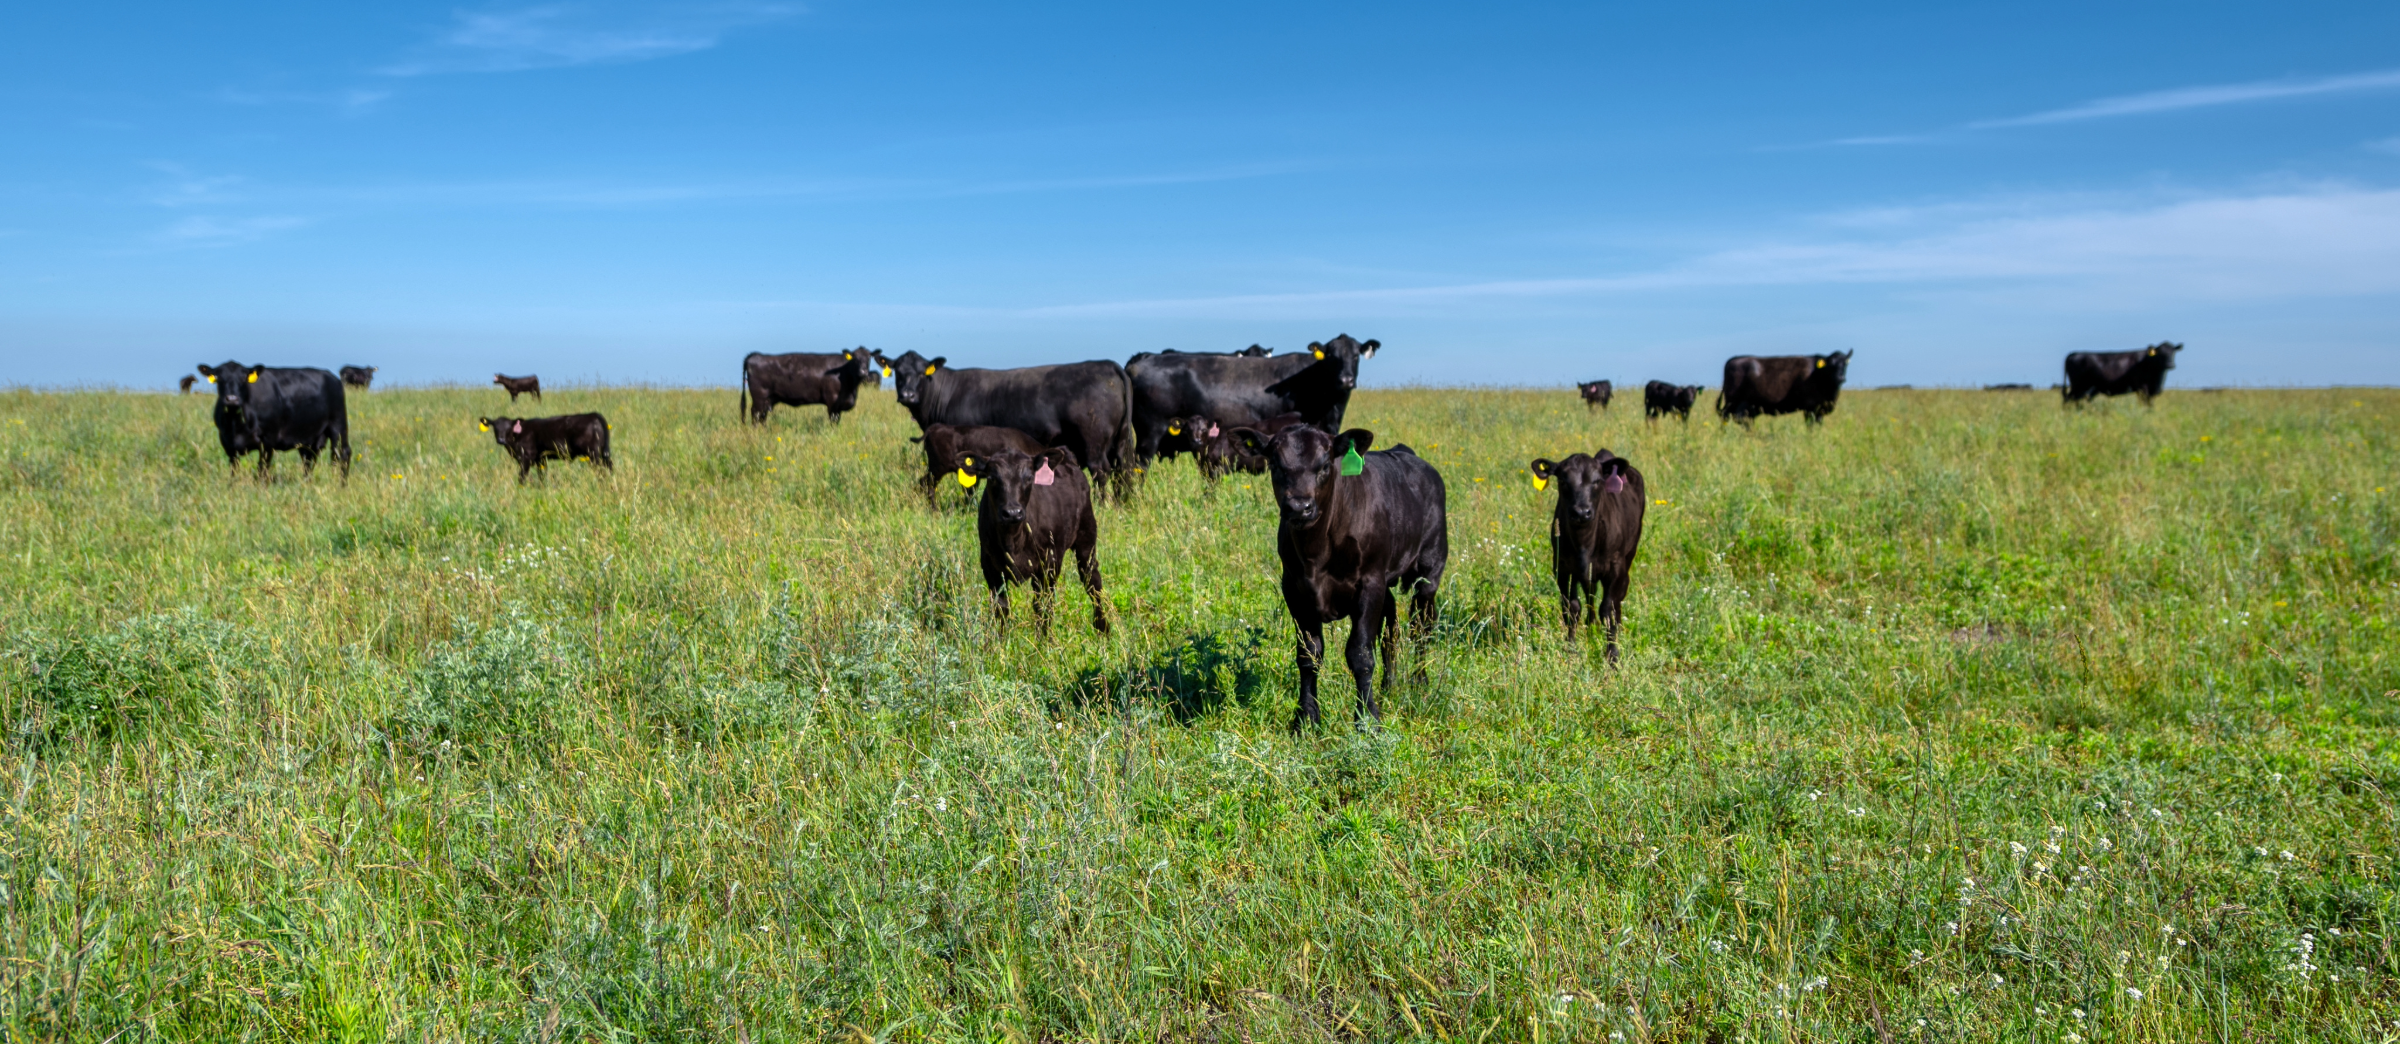 Small herd of cow and calves standing in field